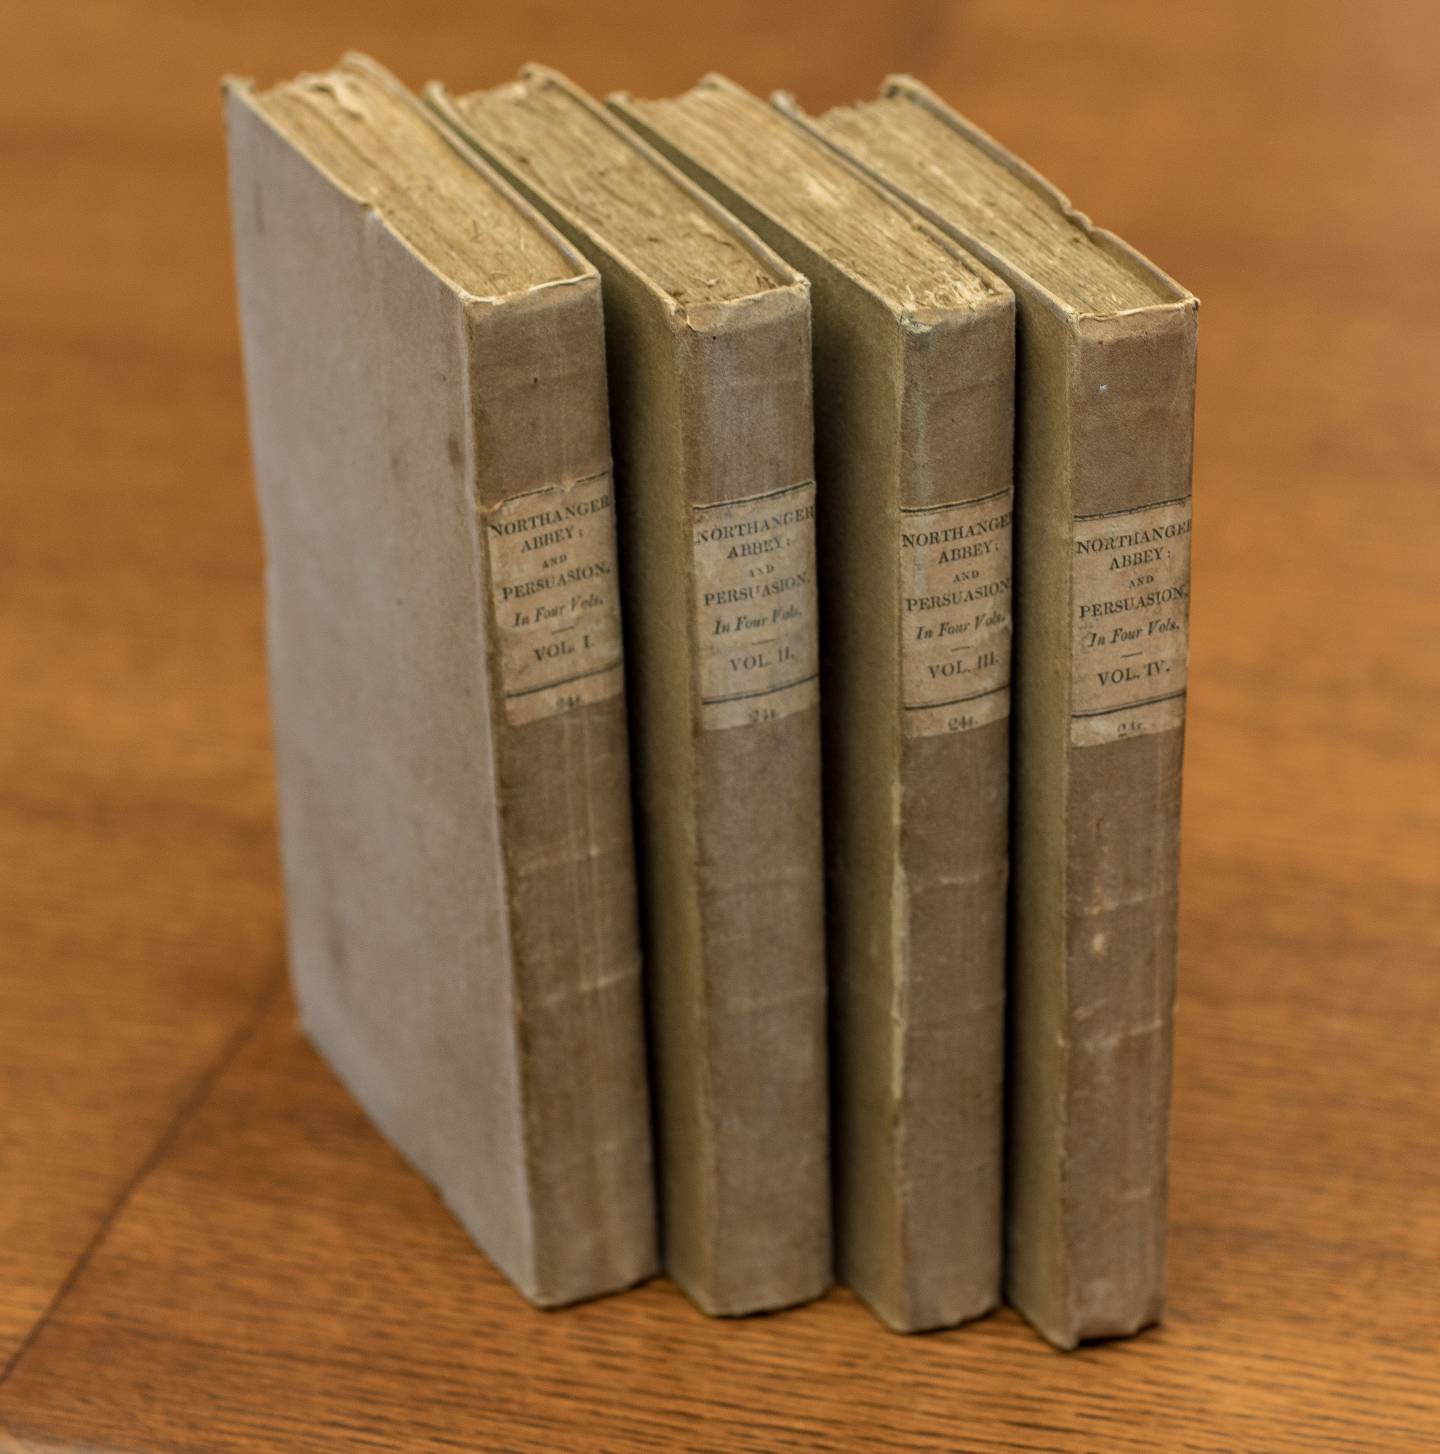 First editions of Northanger Abbey